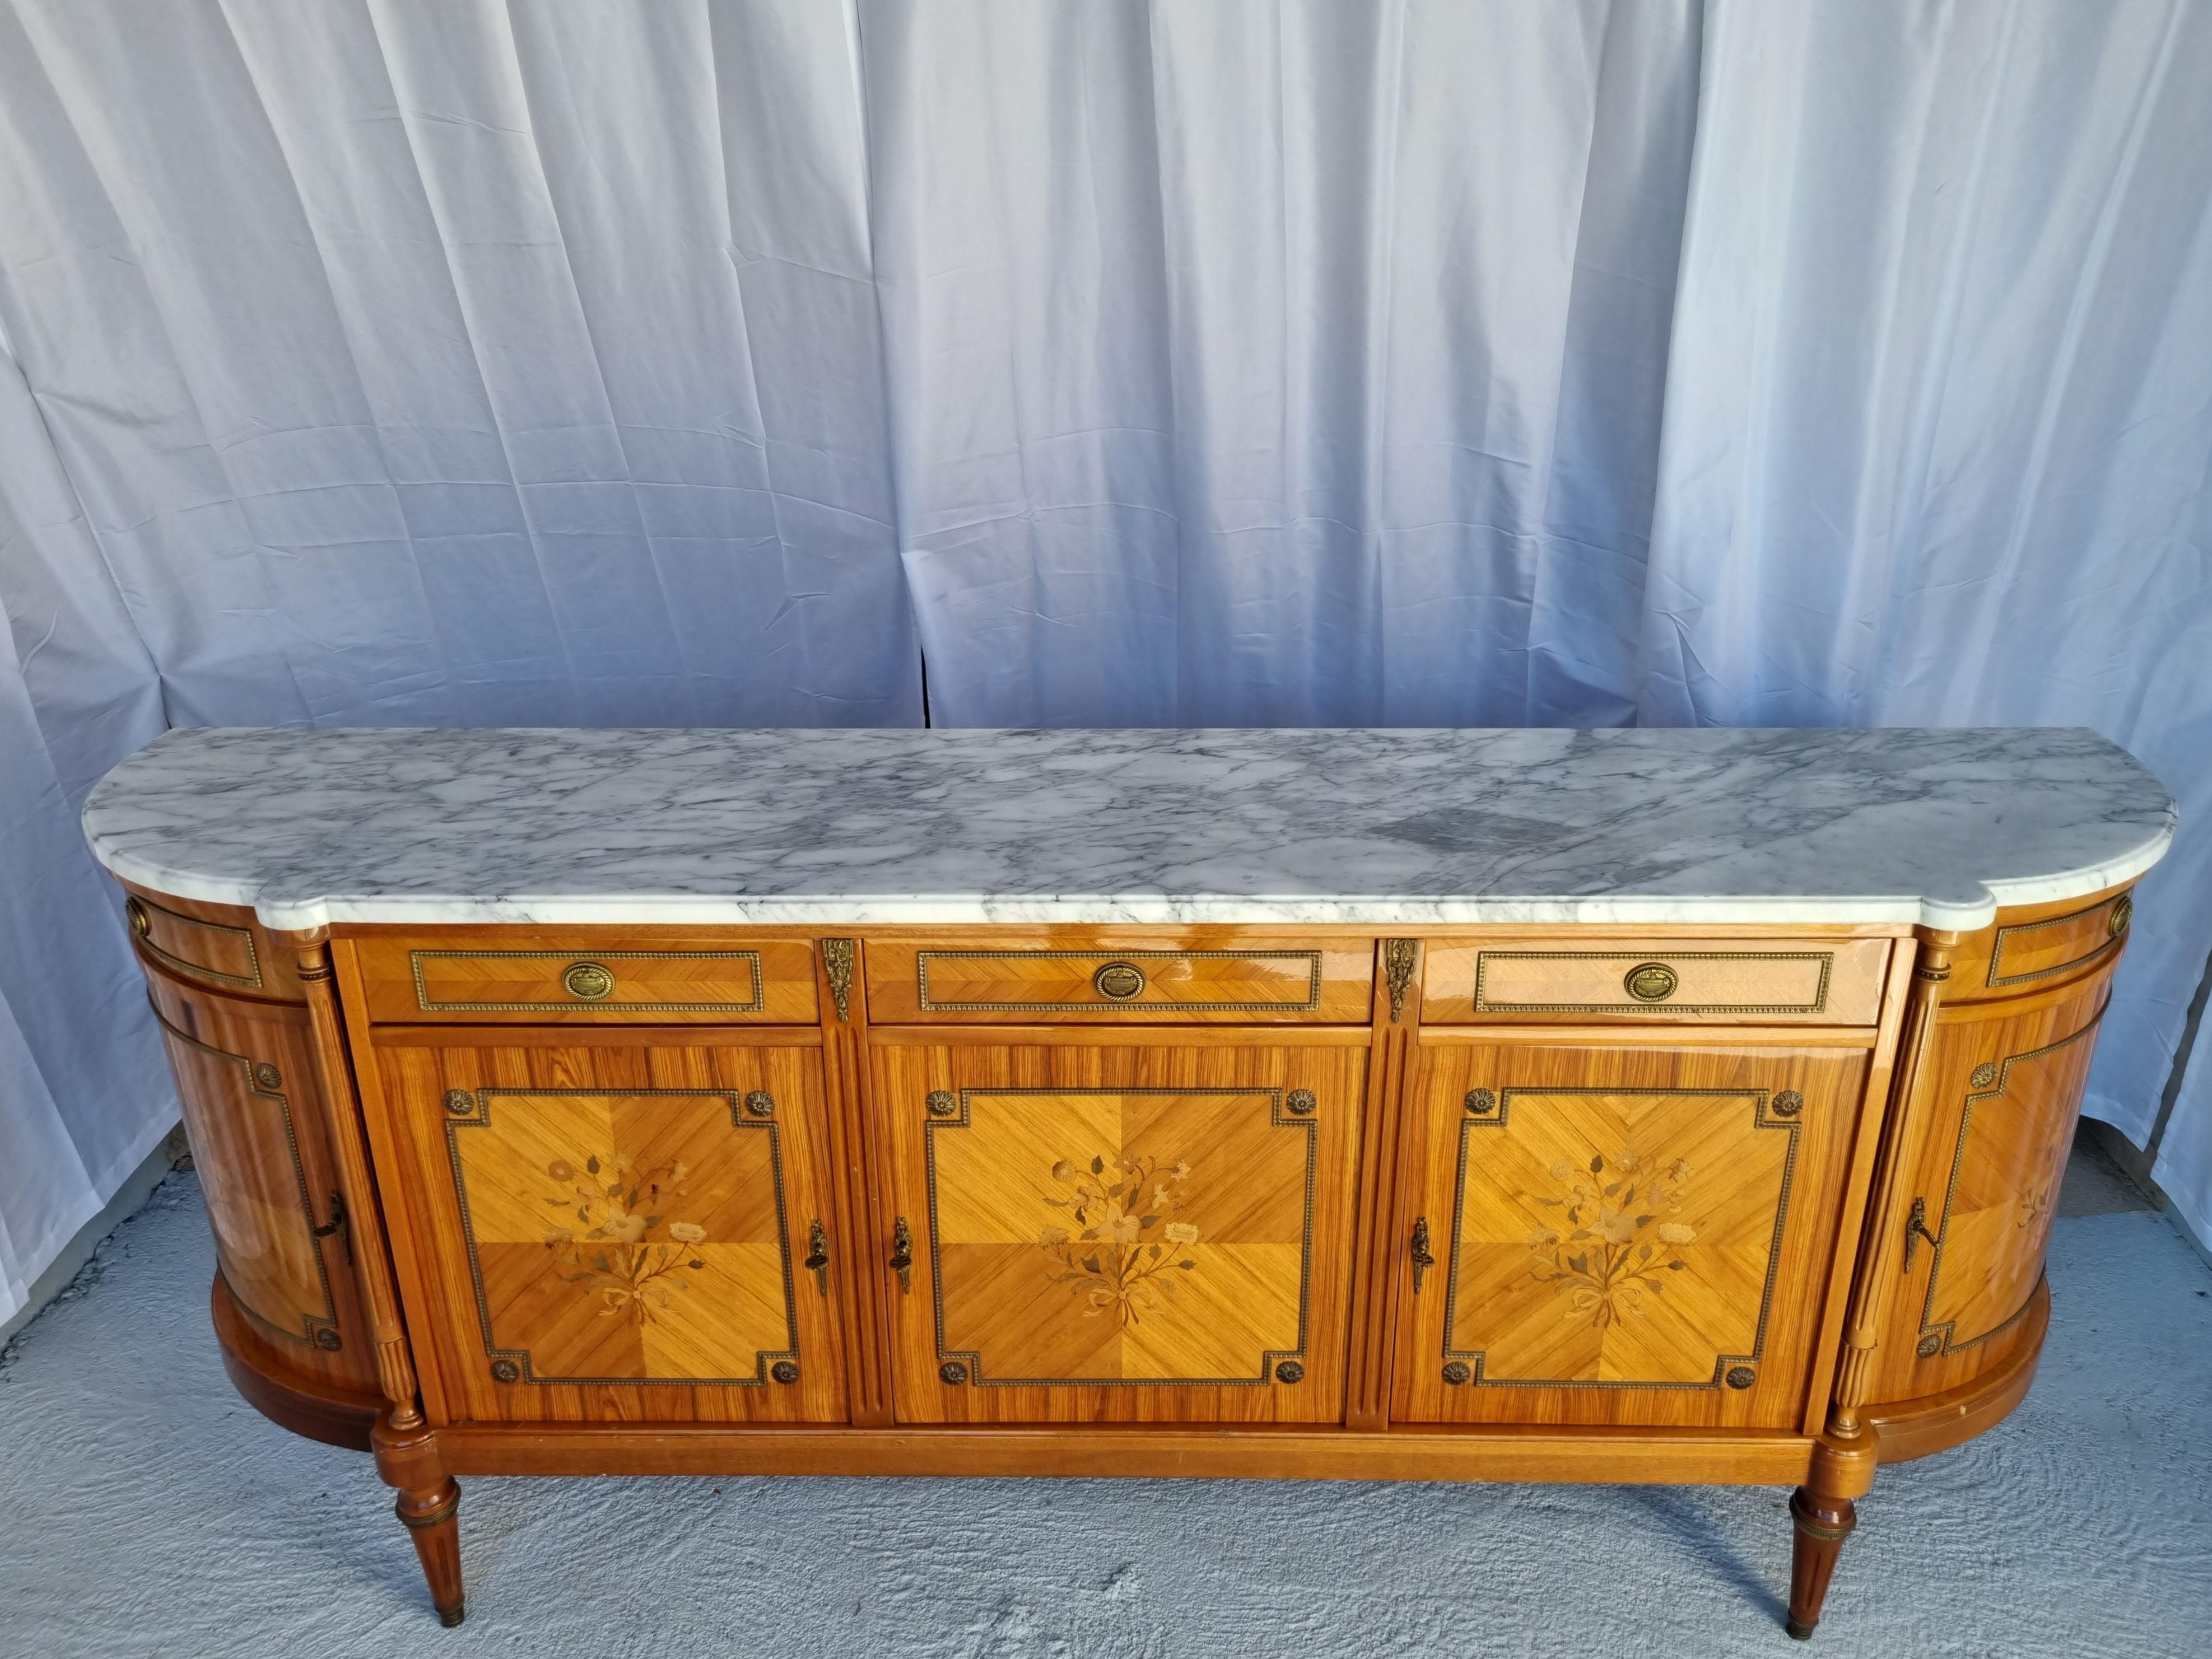 Remarkable Rosewood Sideboard with Kingwood MarquetryStyle Louis XVI/ Marie Antoniette from the 70s

Made in Paris 1976 from high quality materials - Arabescato Marble-Rosewood-Kingwood and gold Bronze.

Arabescato is certainly one of the most